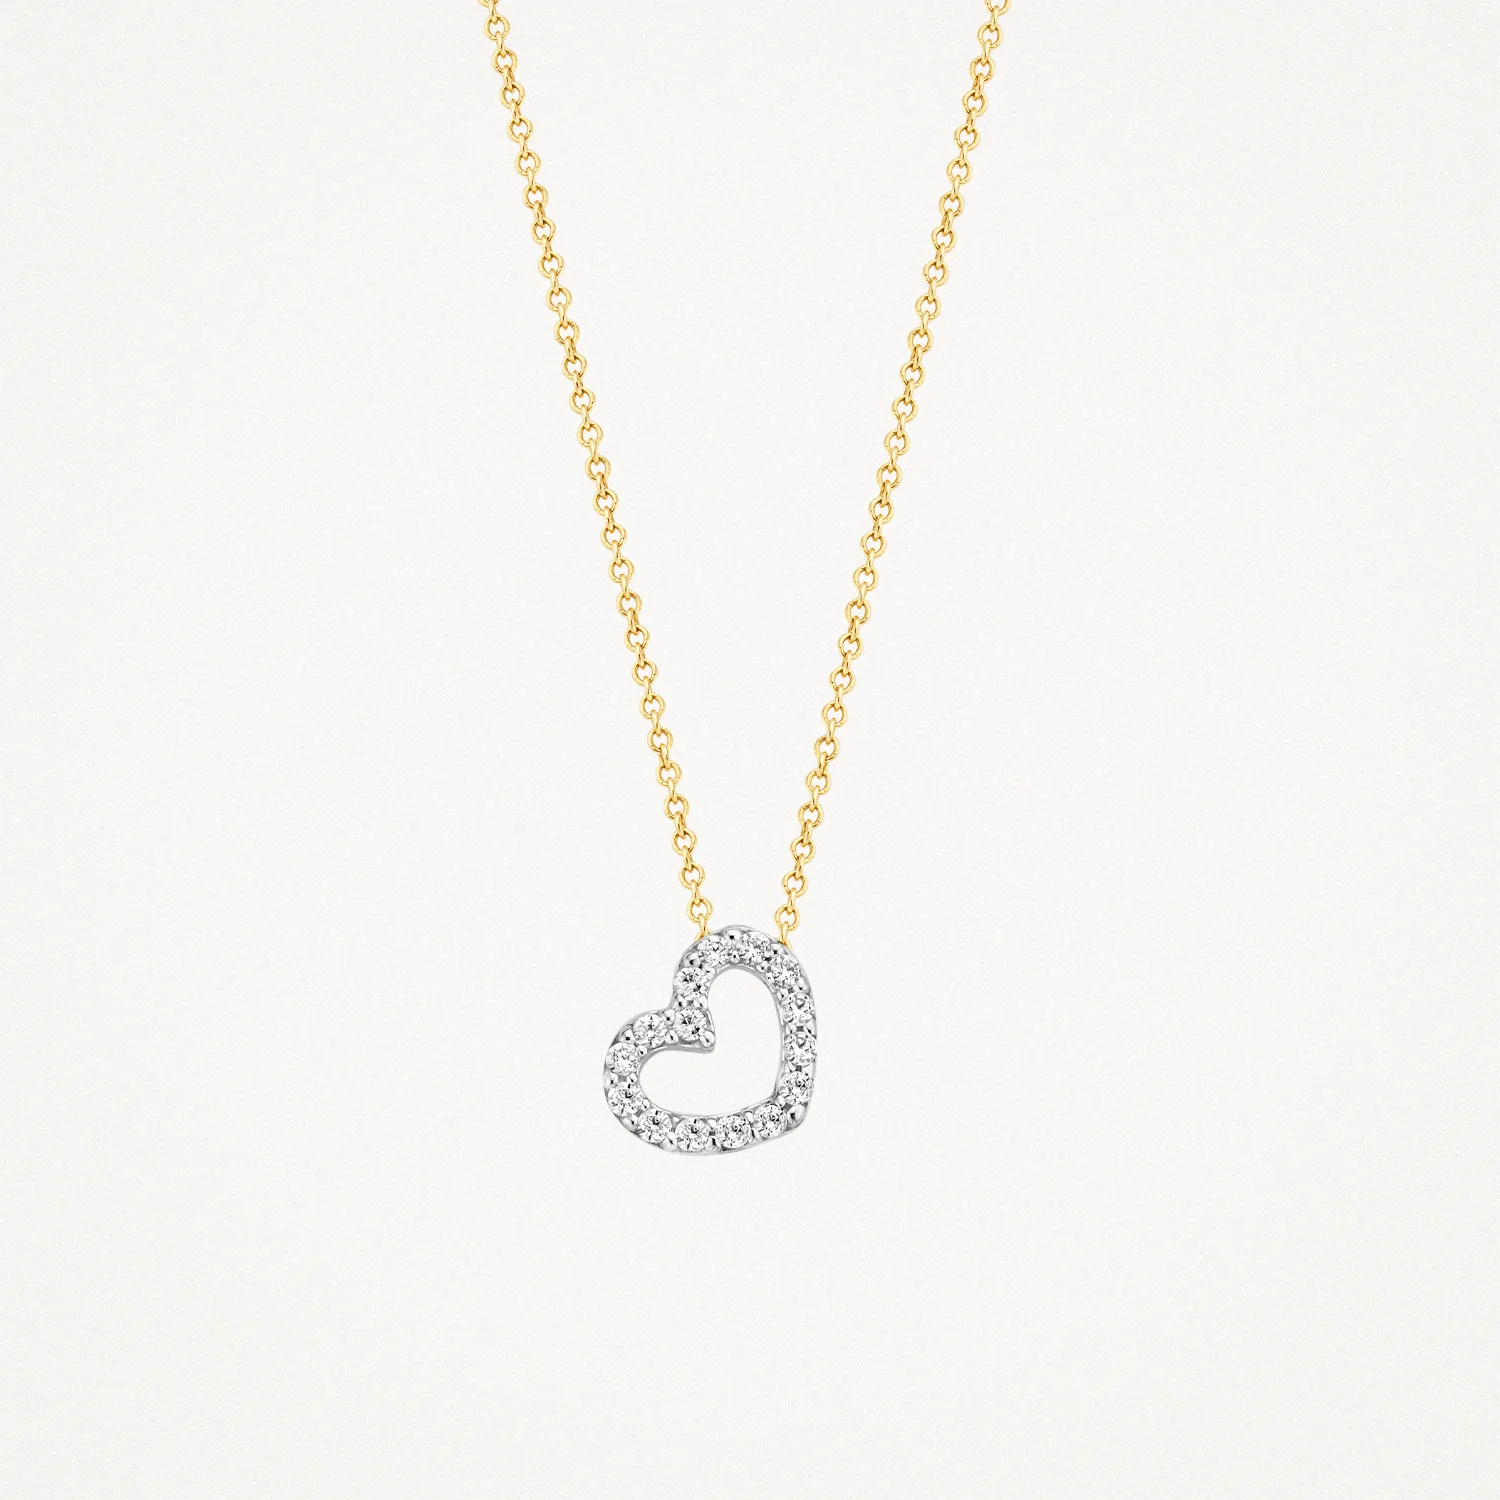 Blush Two-Tone Gold & CZ Open Heart Necklace